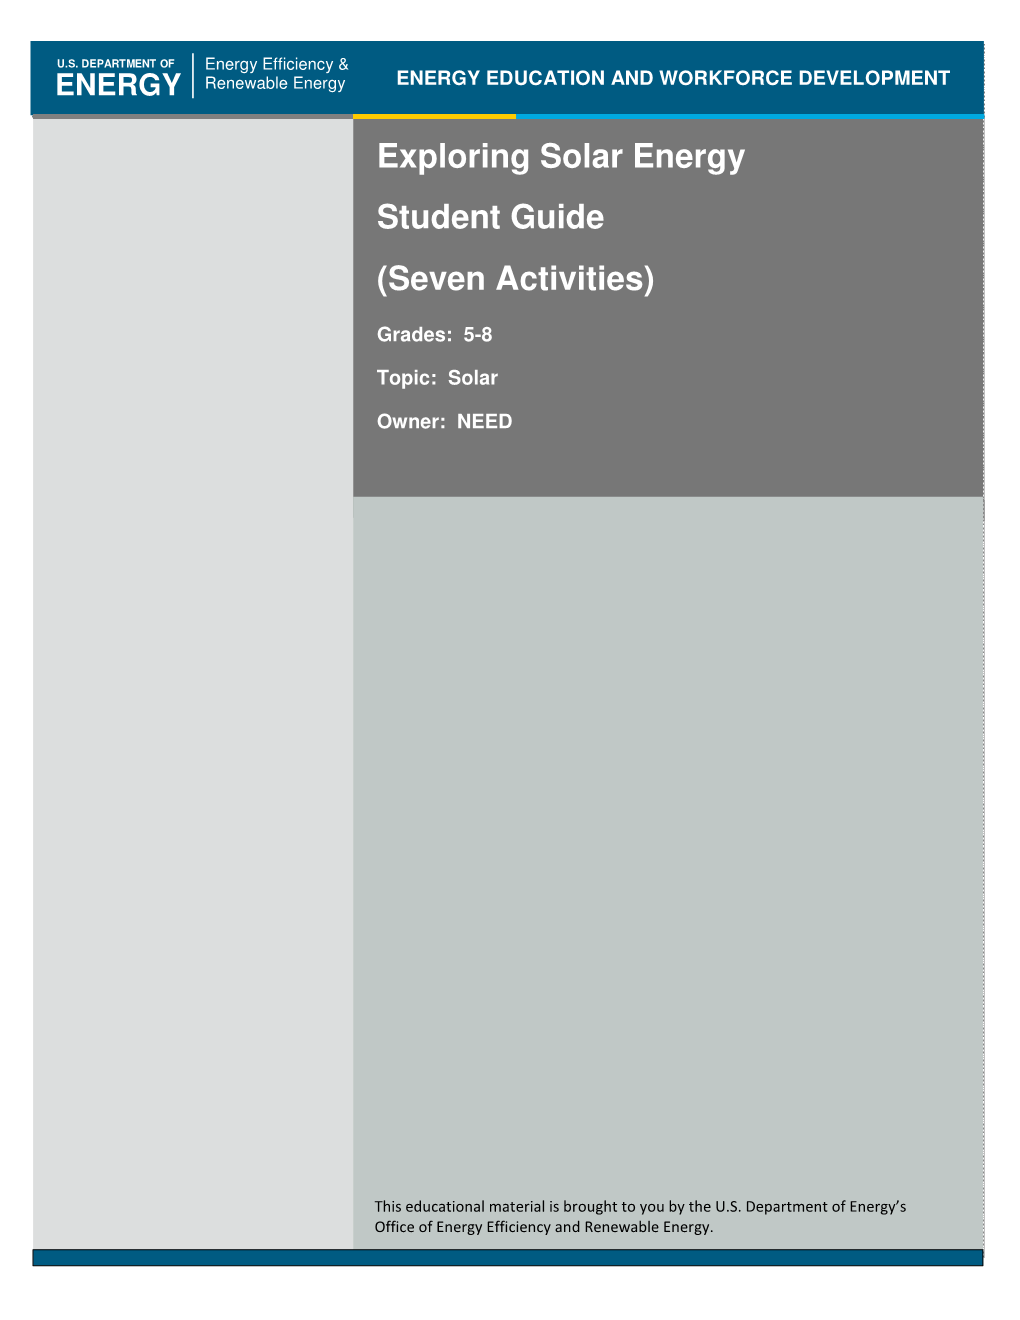 Exploring Solar Energy Student Guide